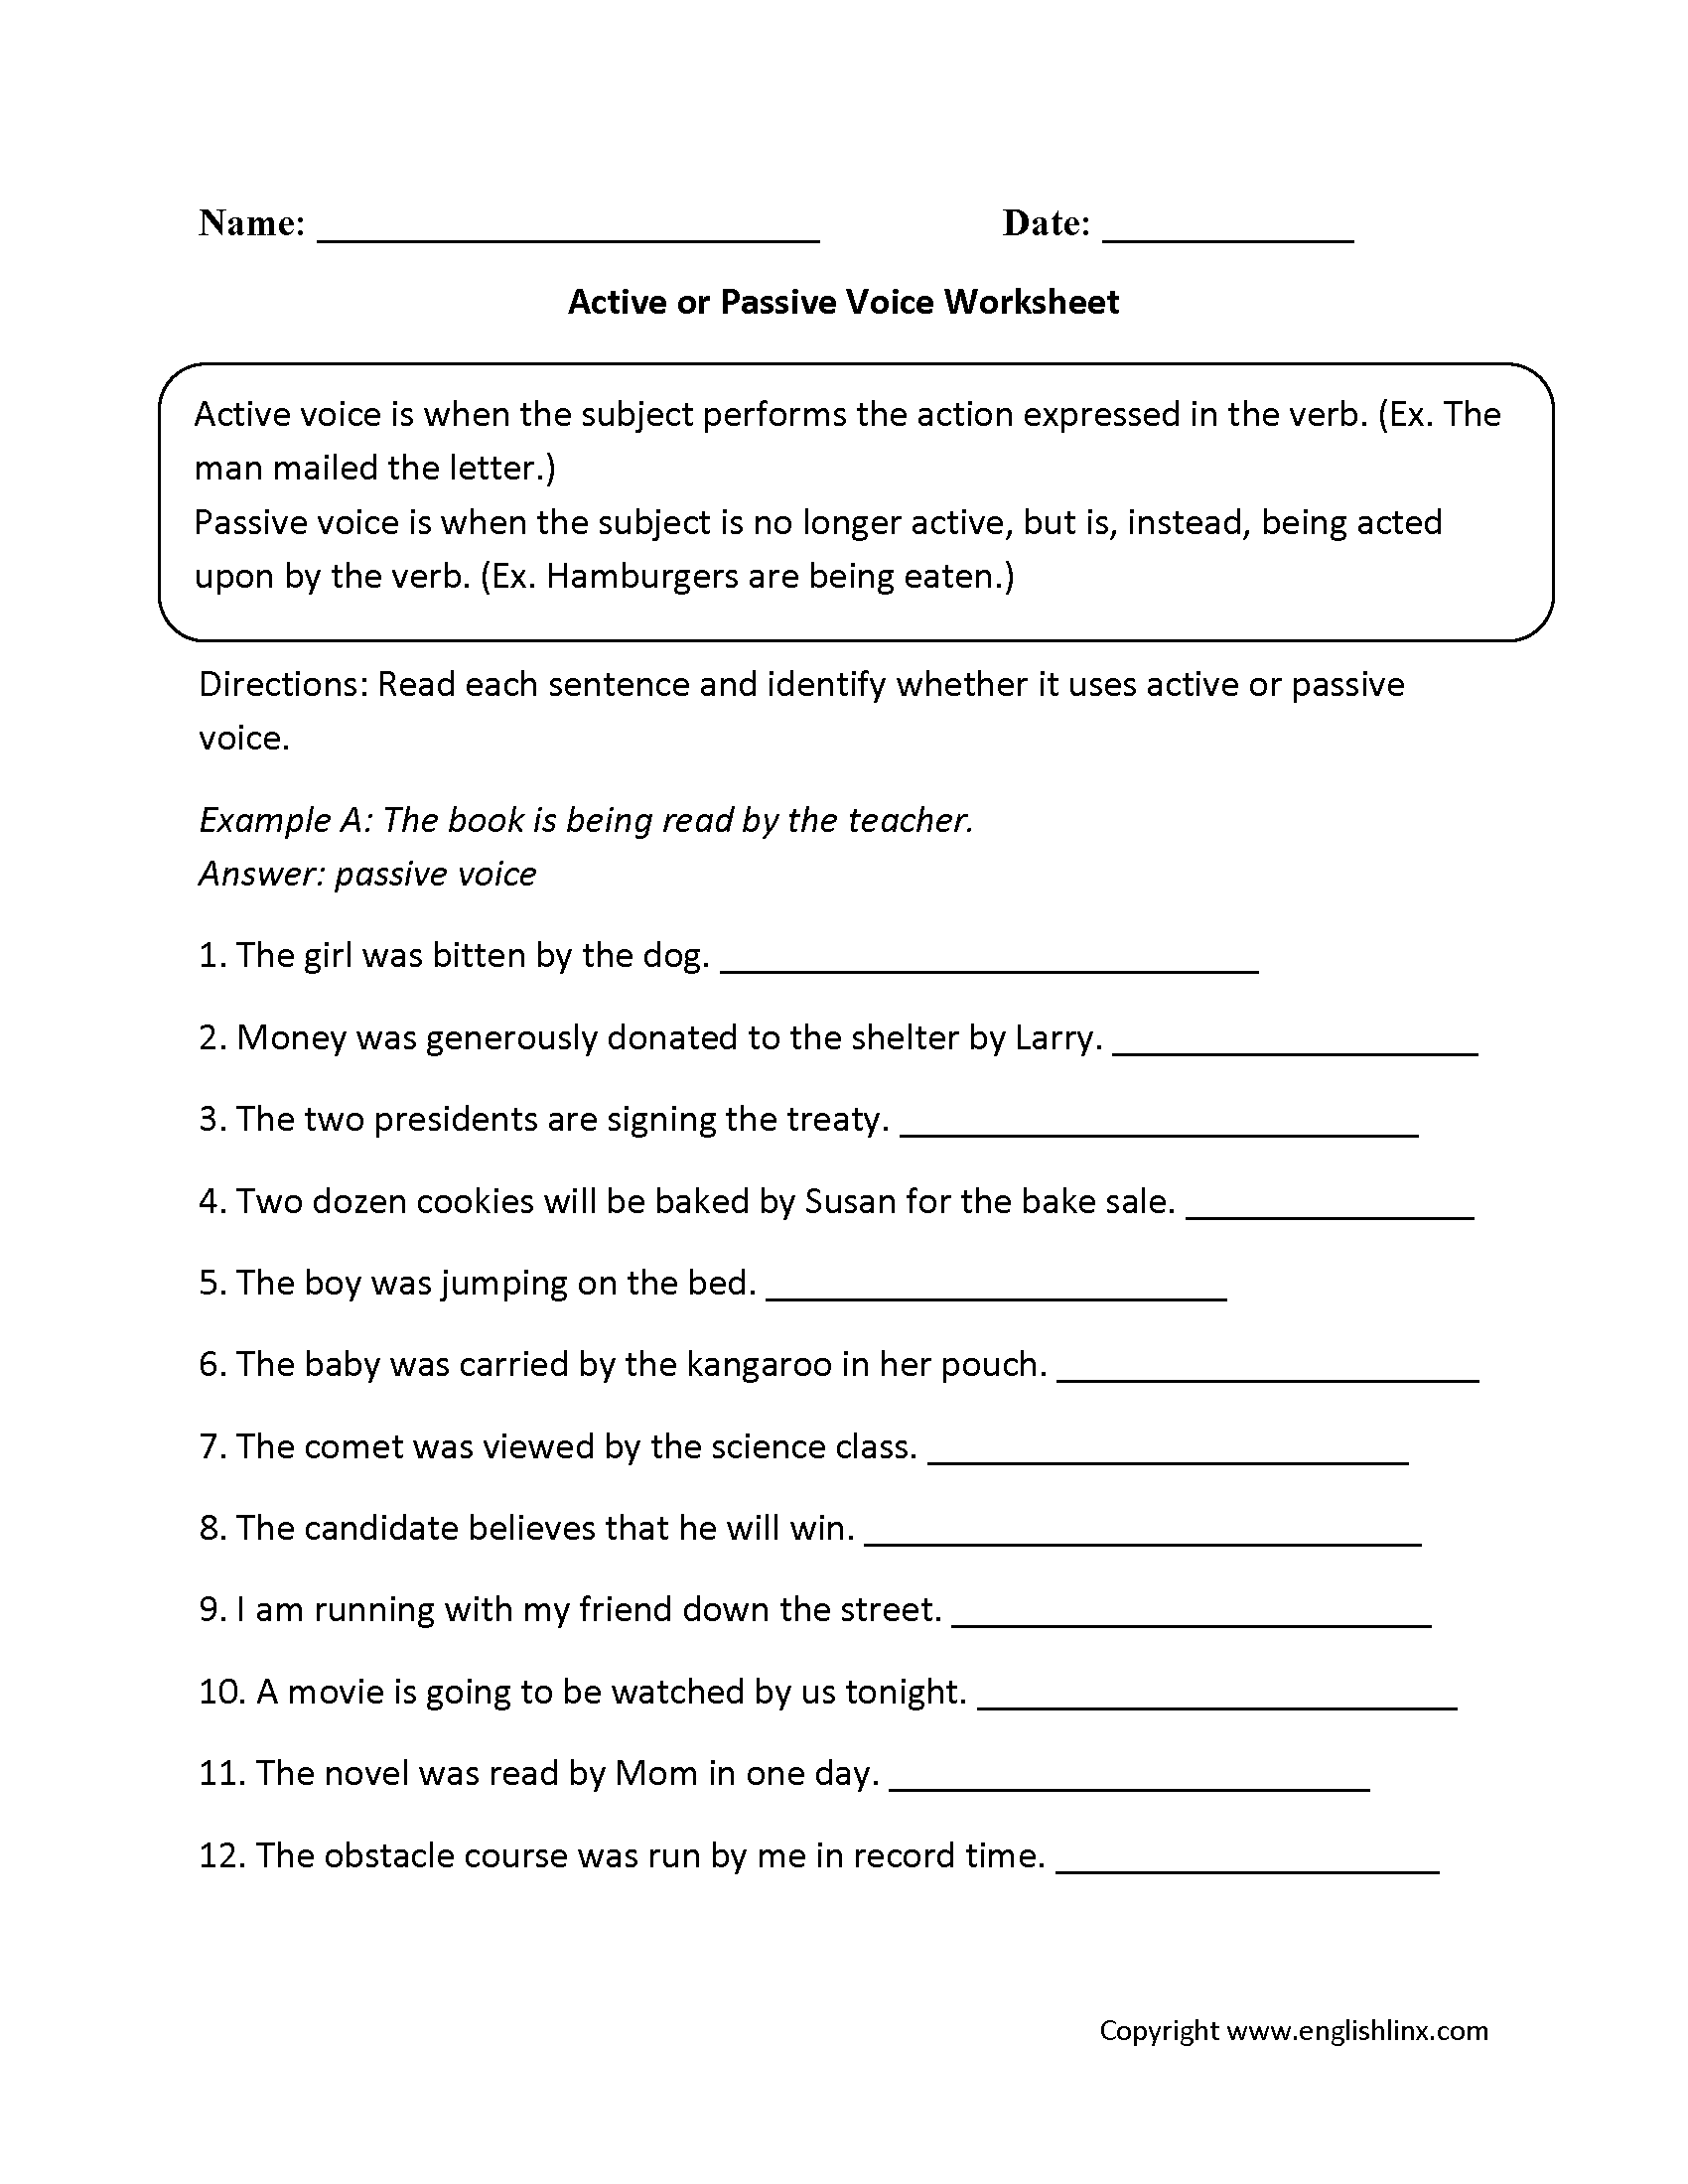 Active or Passive Voice Worksheets